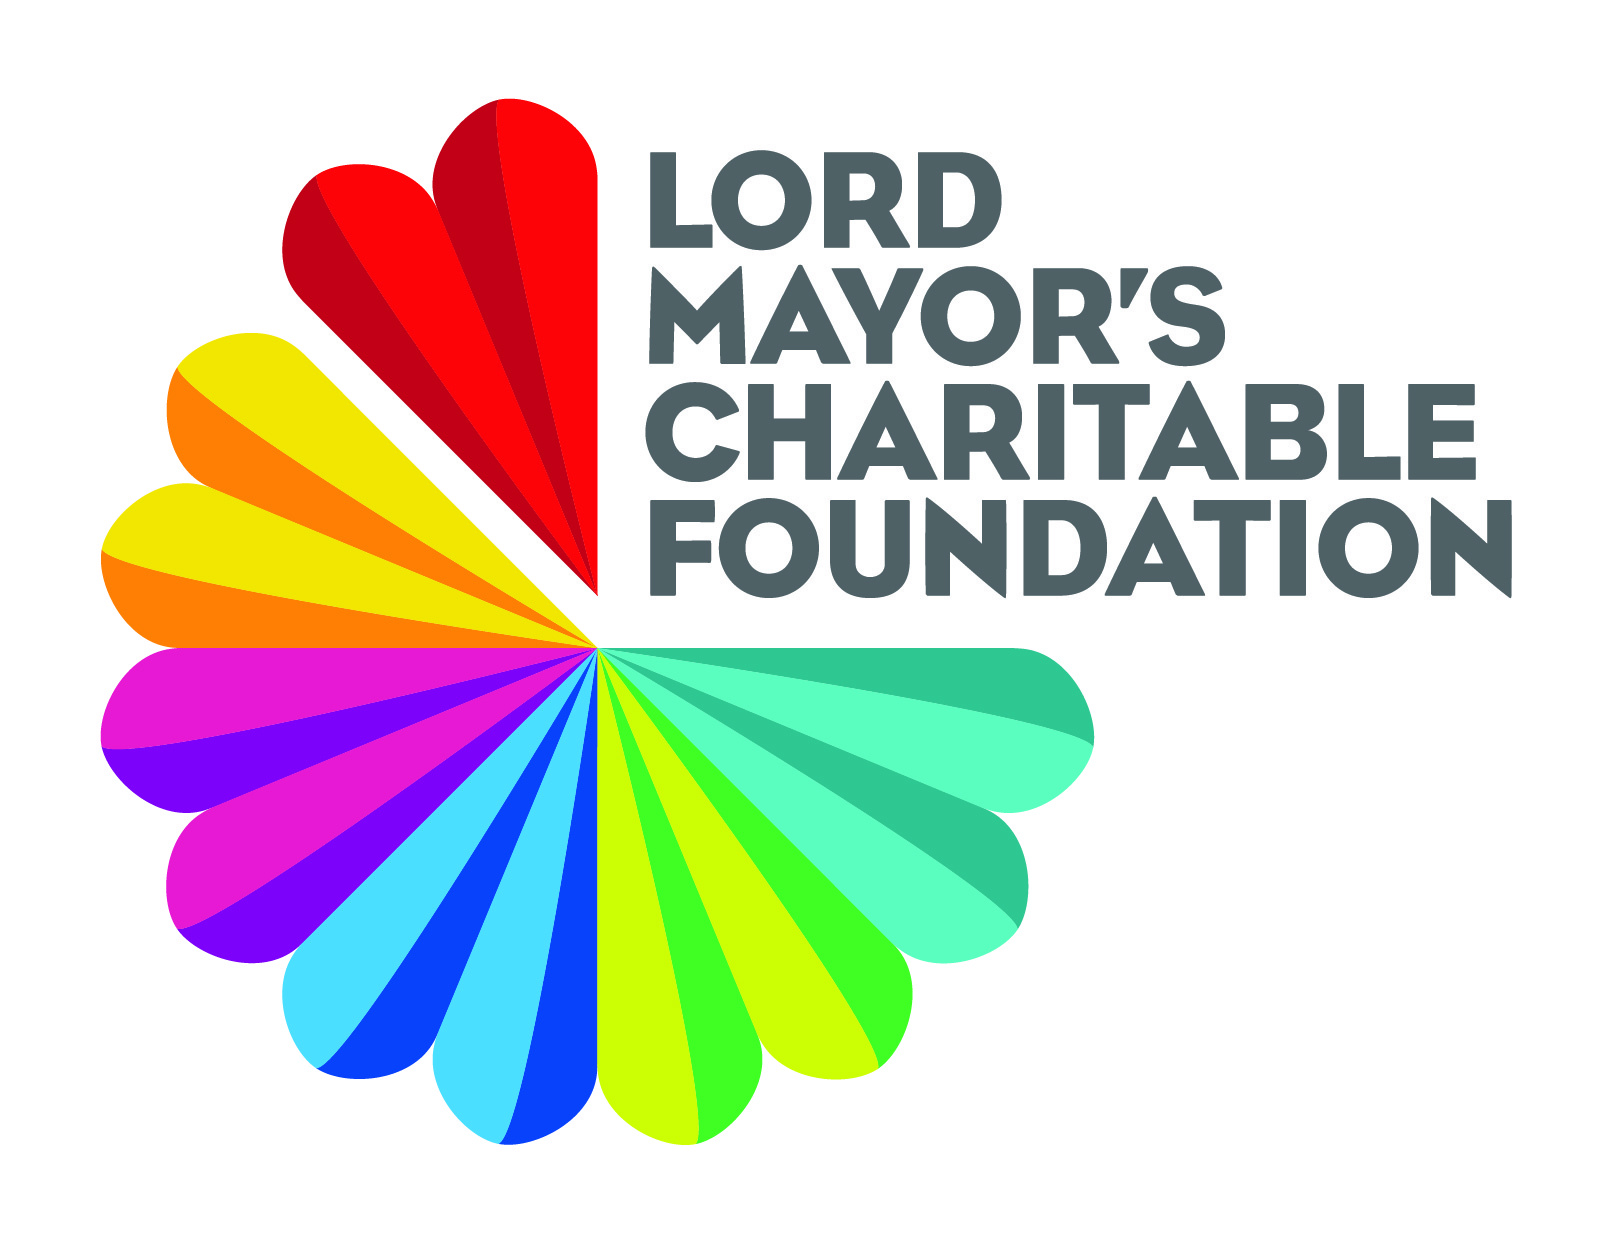 Lord Mayors Charitable Foundation